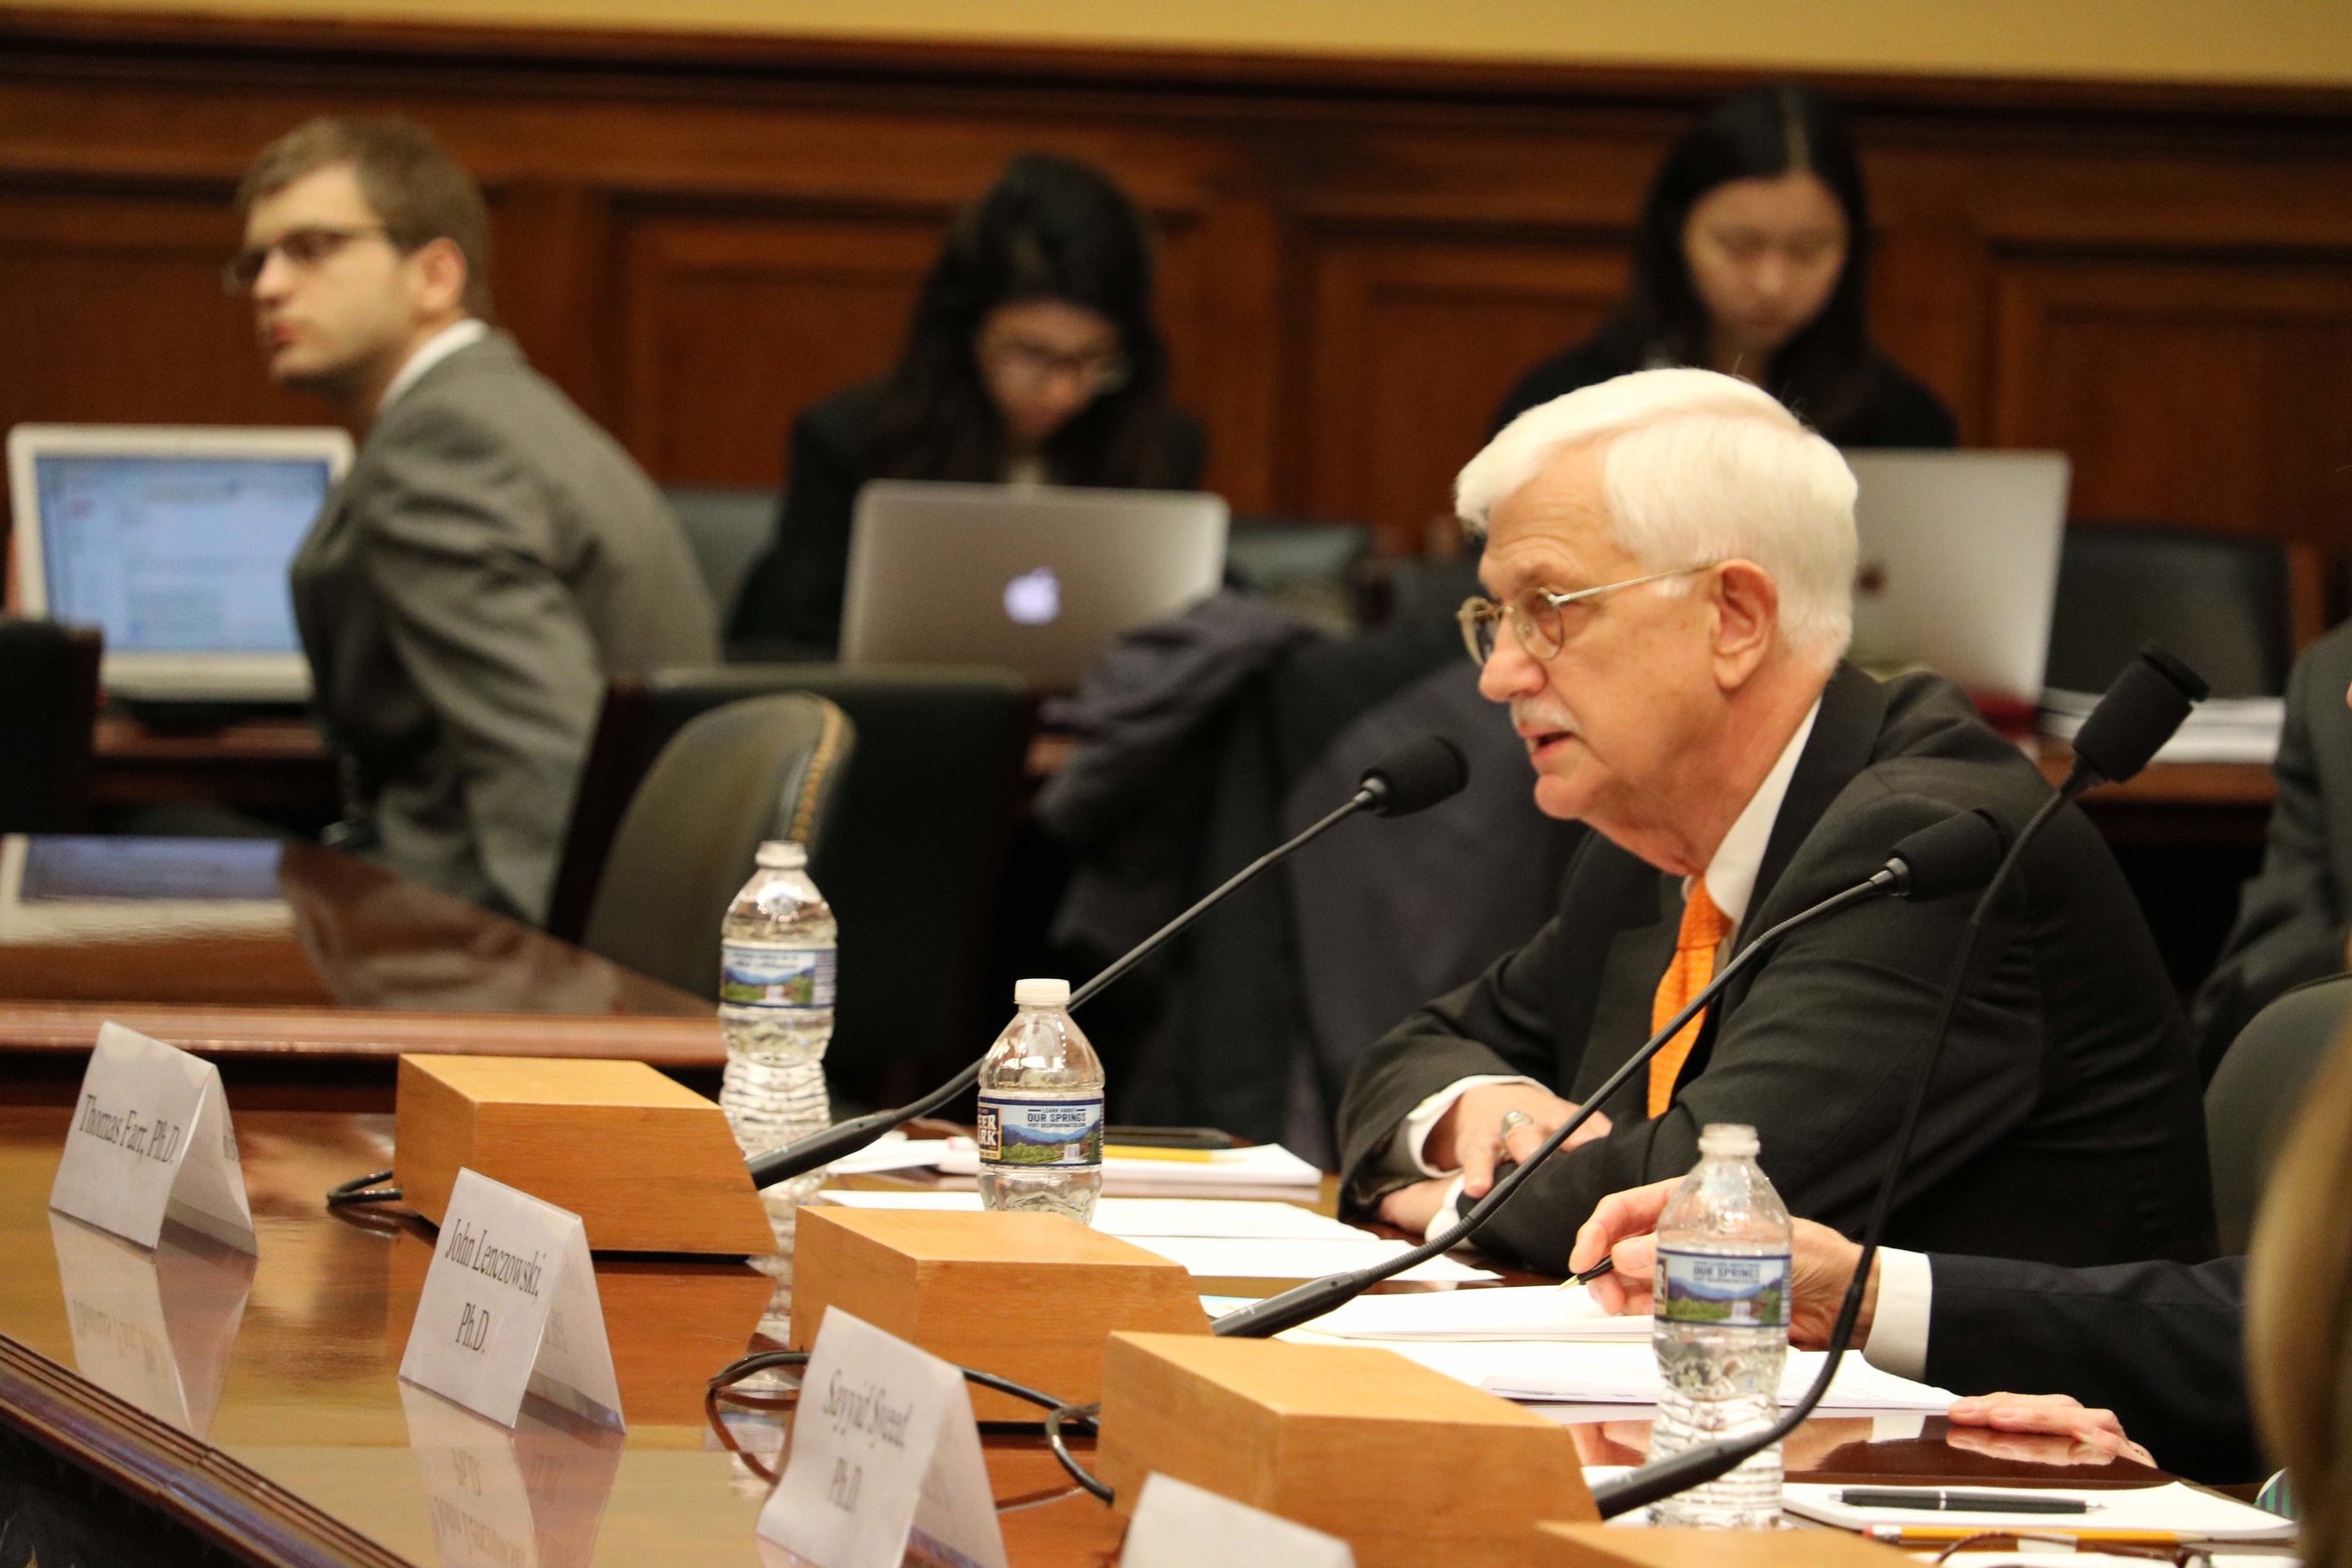 Thomas Farr testifies before the Subcommittee on Africa, Global Health, Global Human Rights, and International Organizations of the House Foreign Affairs Committee, December 6, 2017. Photo: RFI/Jeremy Barker